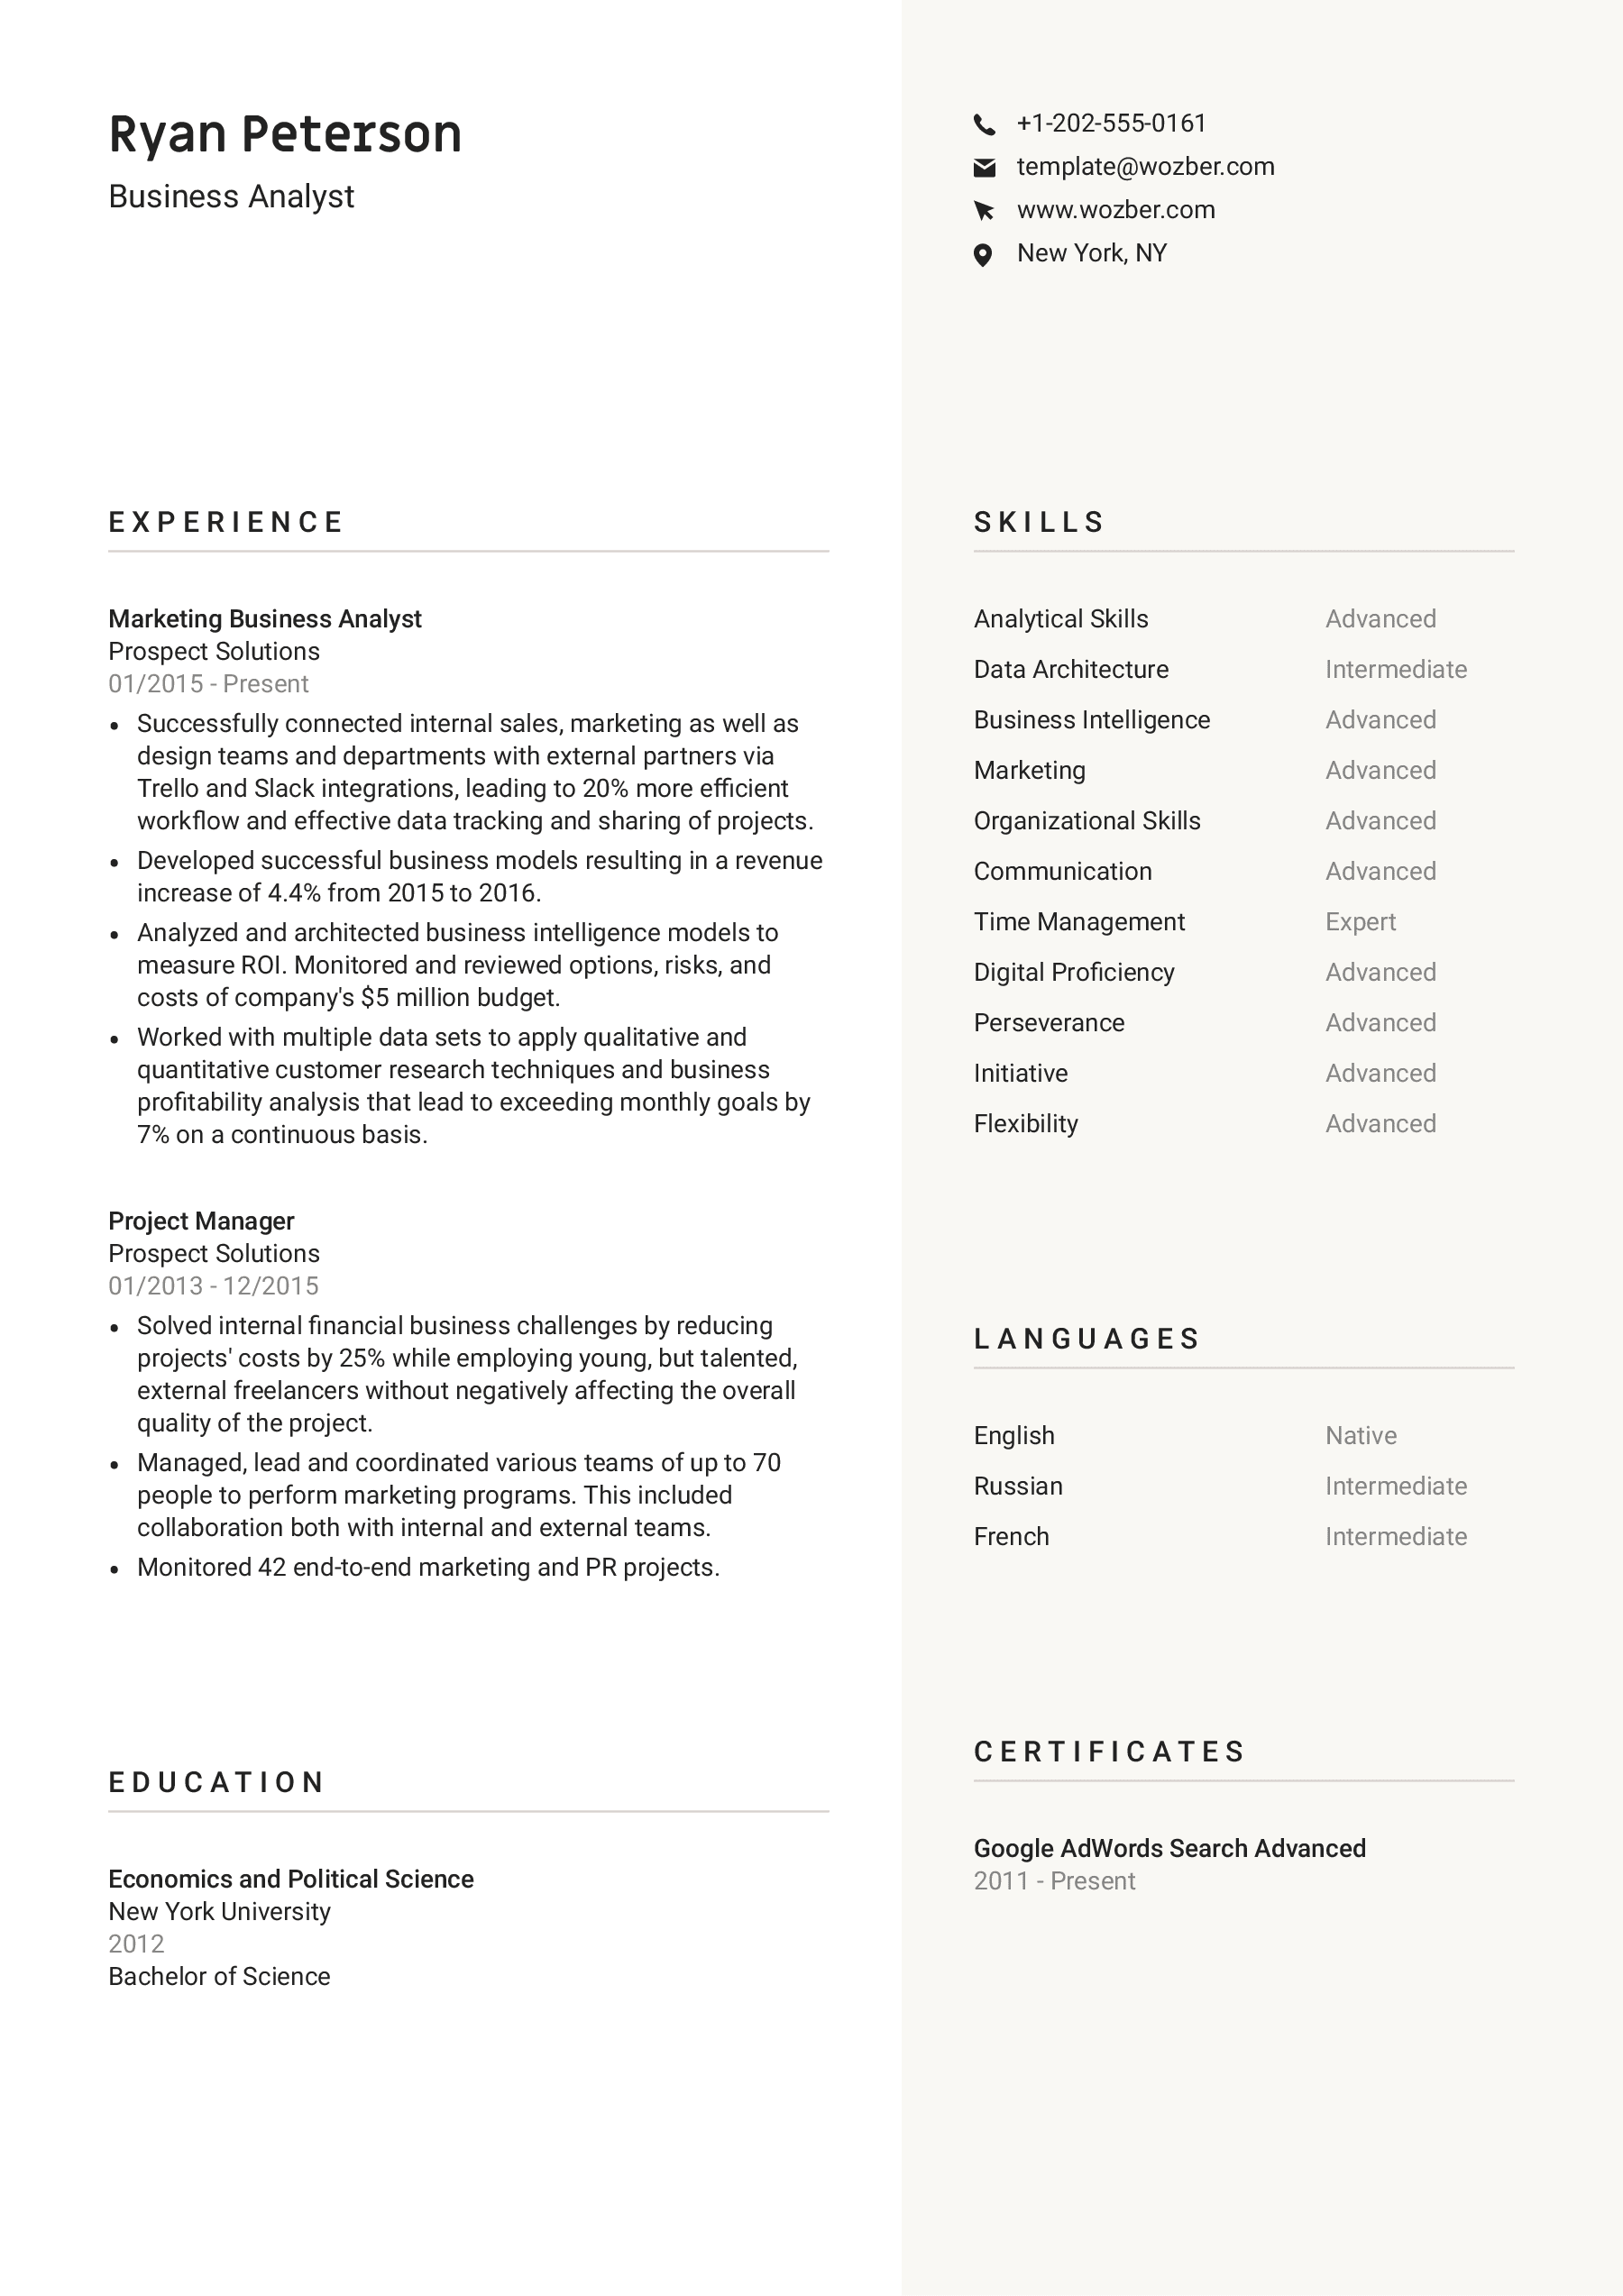 A modern two-column resume template with a soft and matching color choice, built for professionals who wish a clean and simple design solution to portray their work achievements.